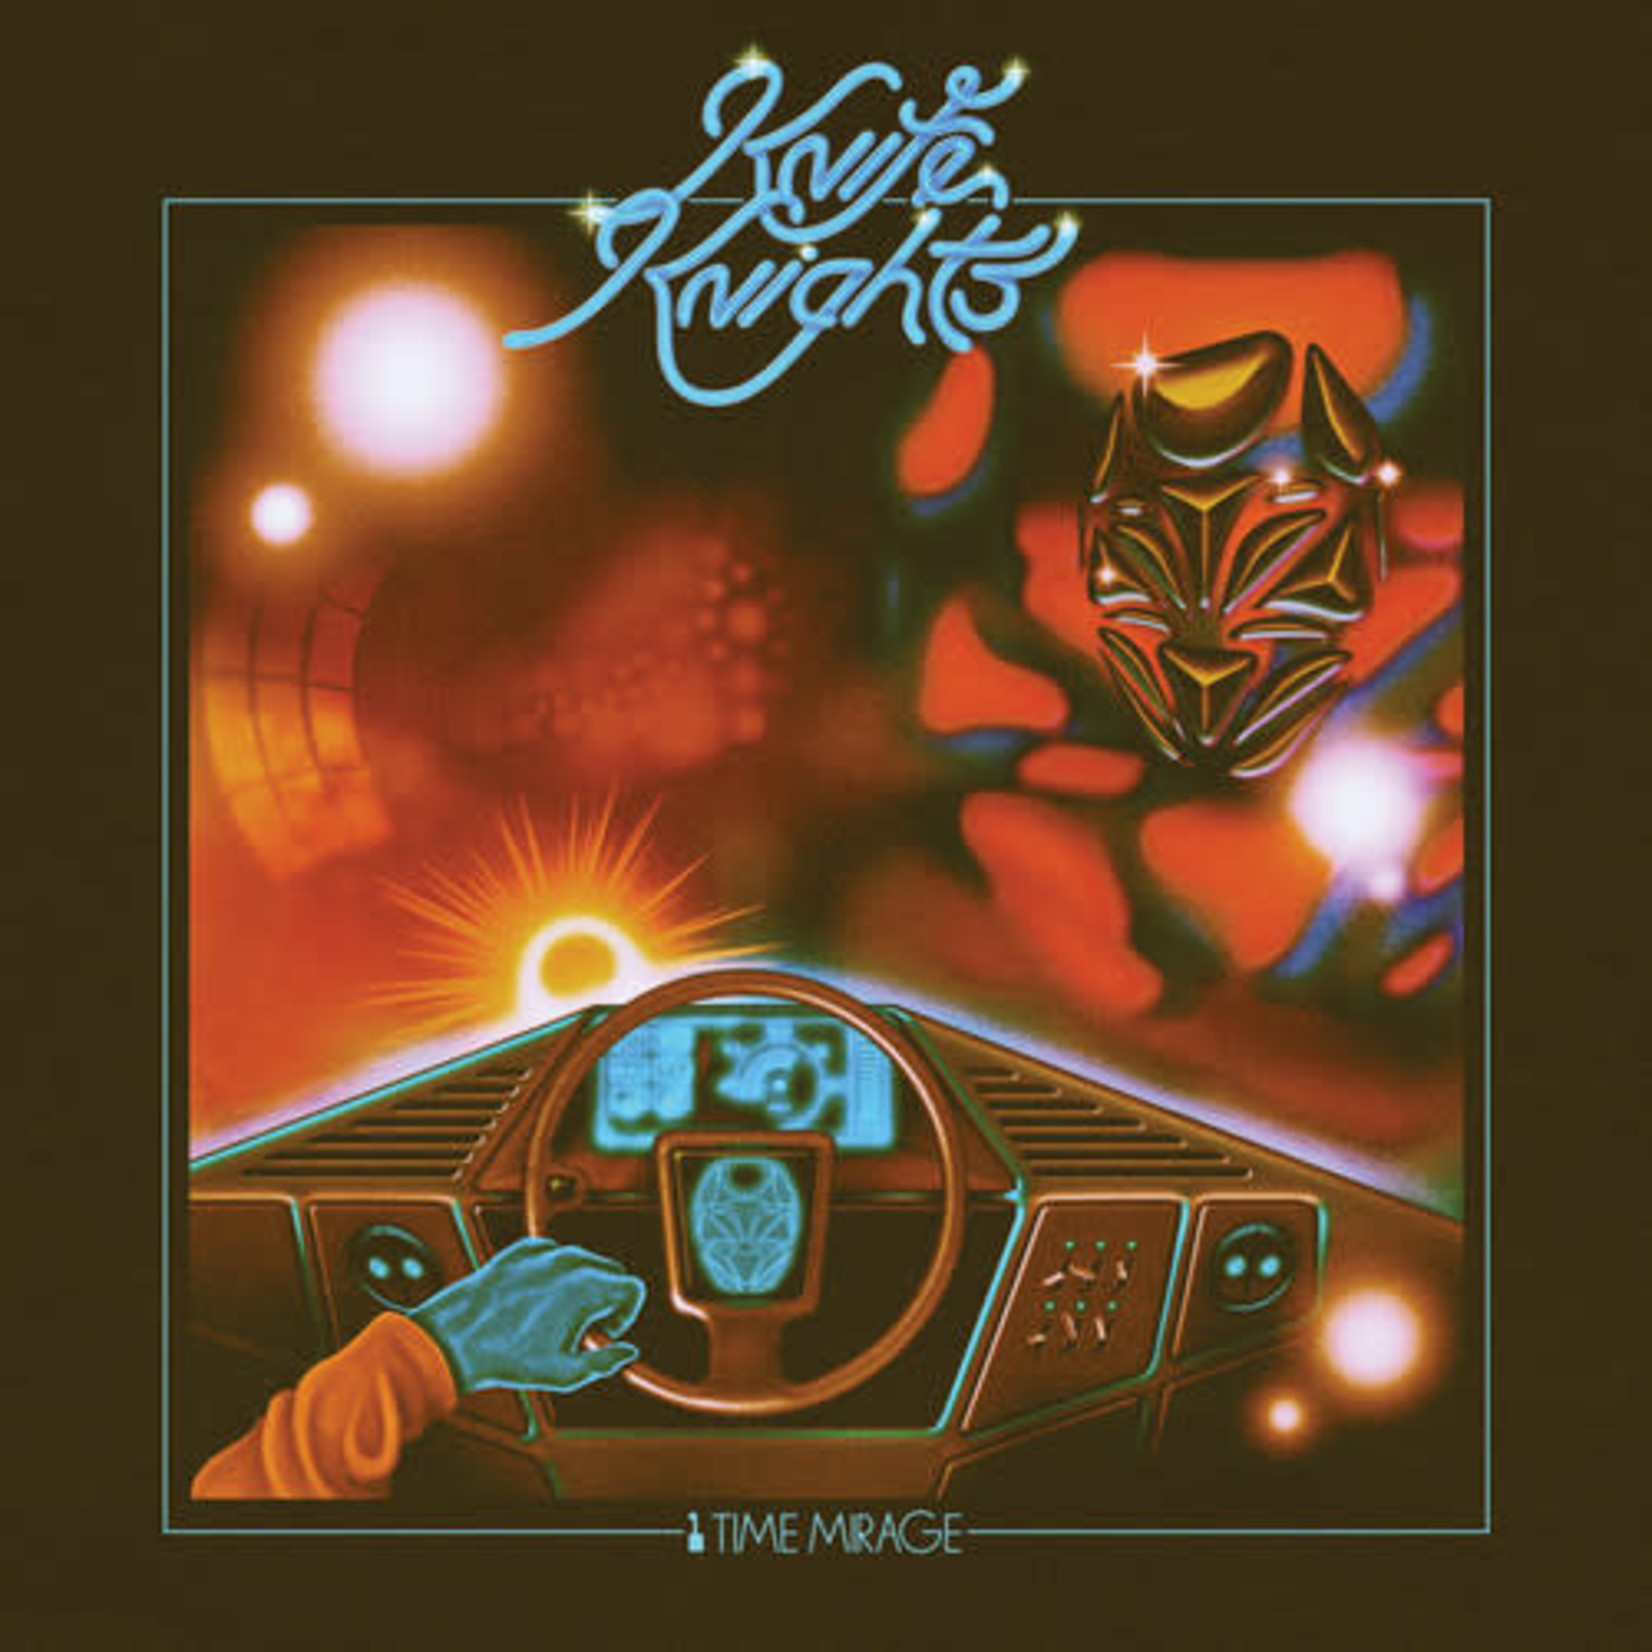 Sub Pop Knife Knights - 1 Time Mirage (LP) [Blue/White]